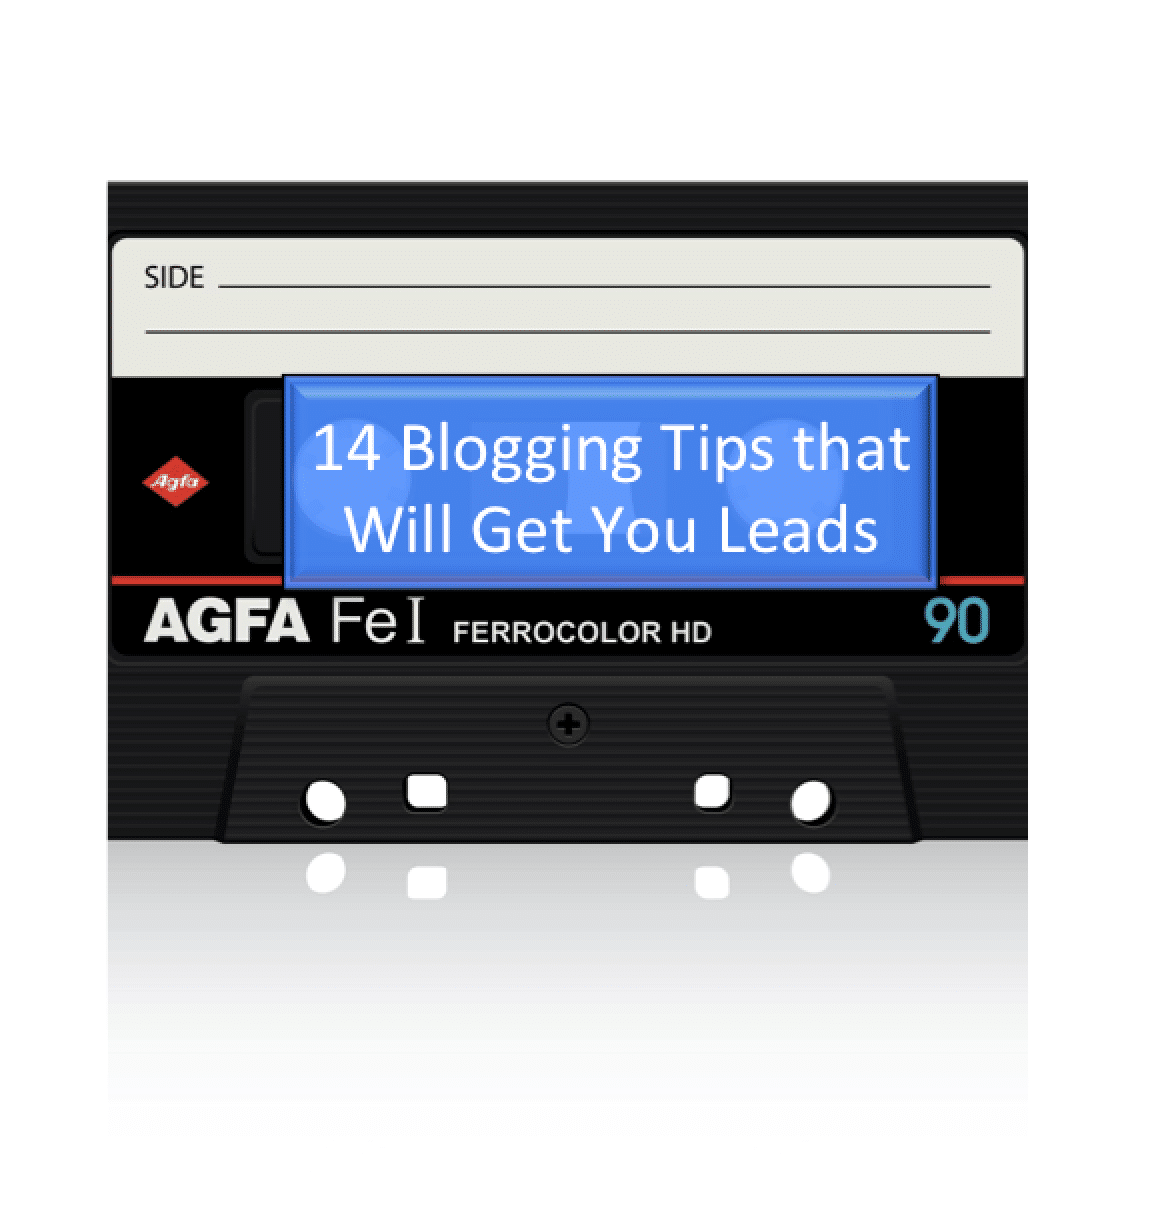 14 Blogging Tips to Get More Leads